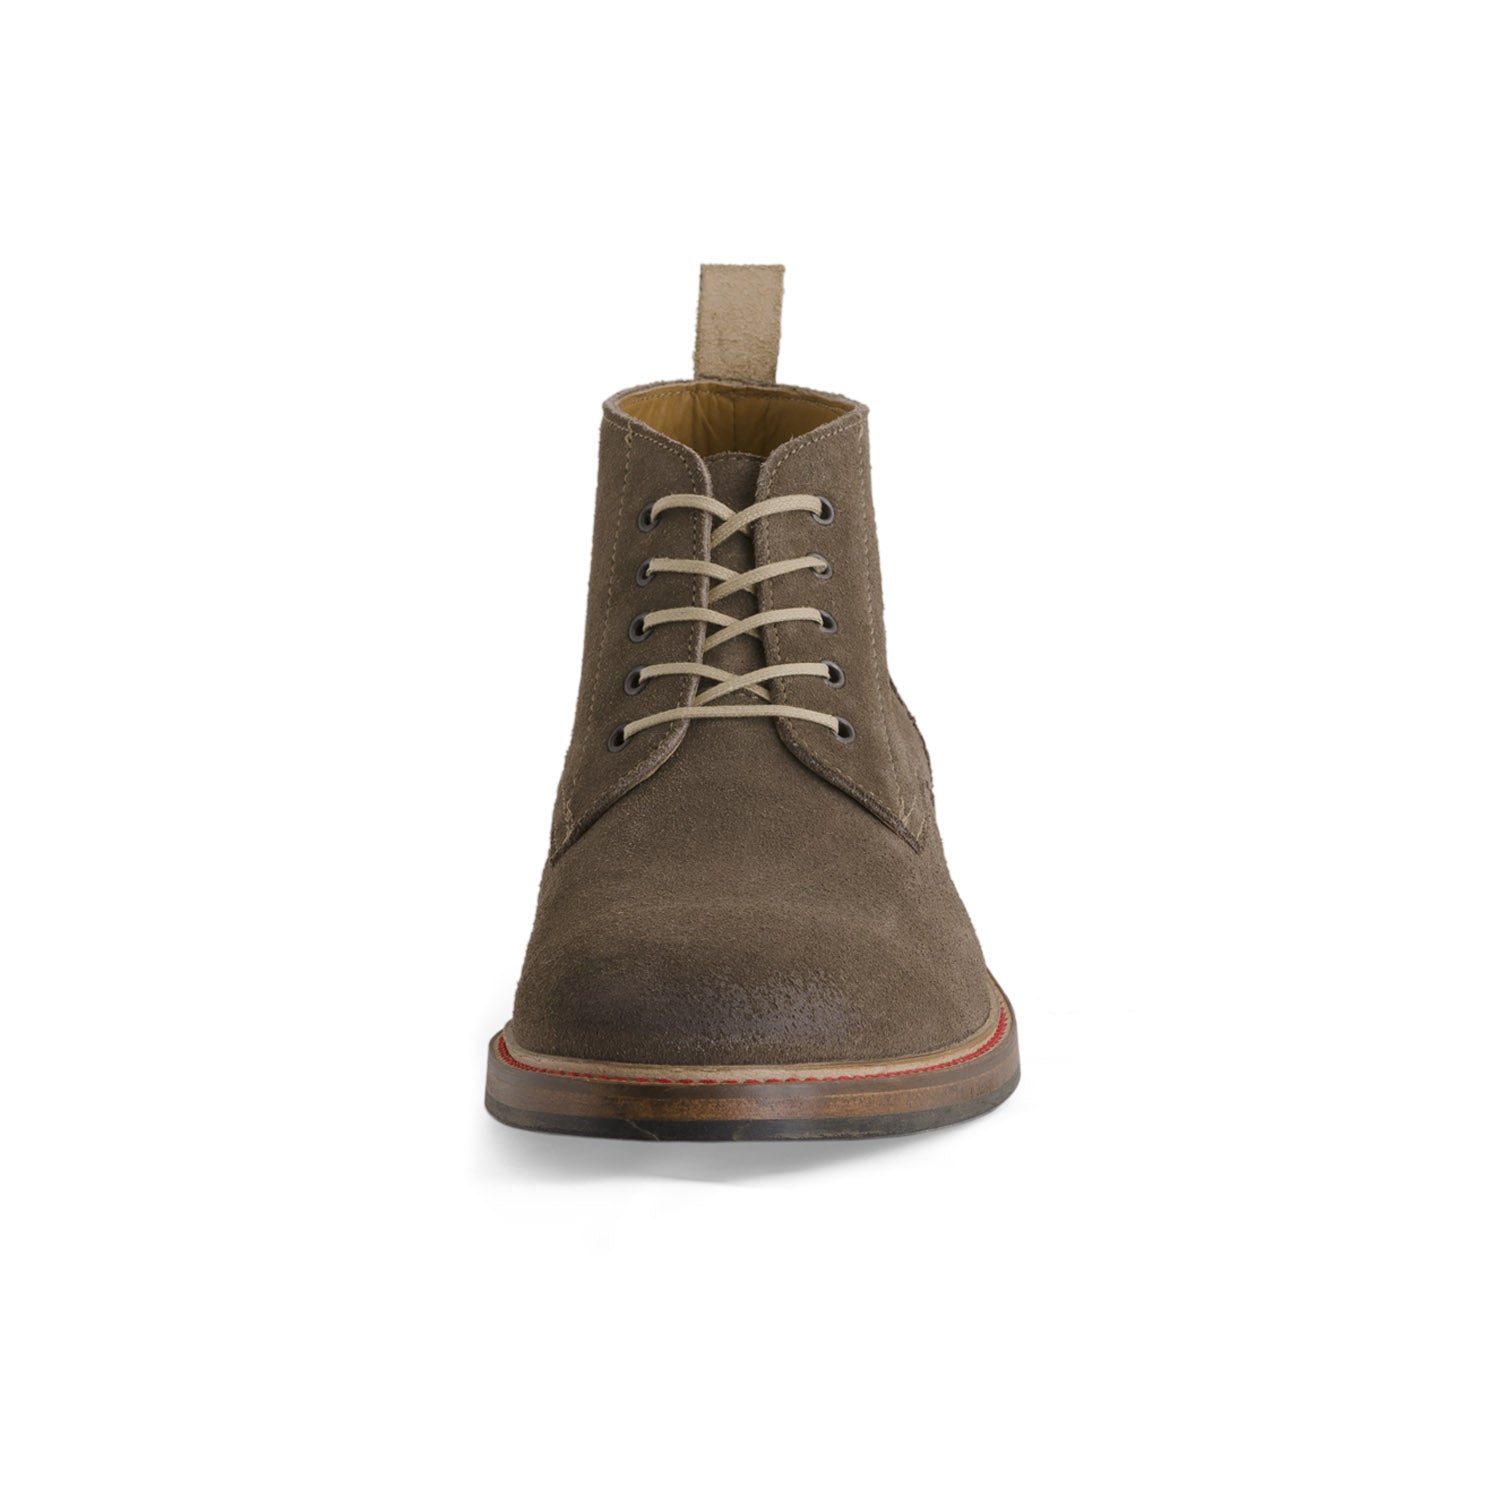 The Limited-Edition Desert Boot (3 color options) - NiK Kacy